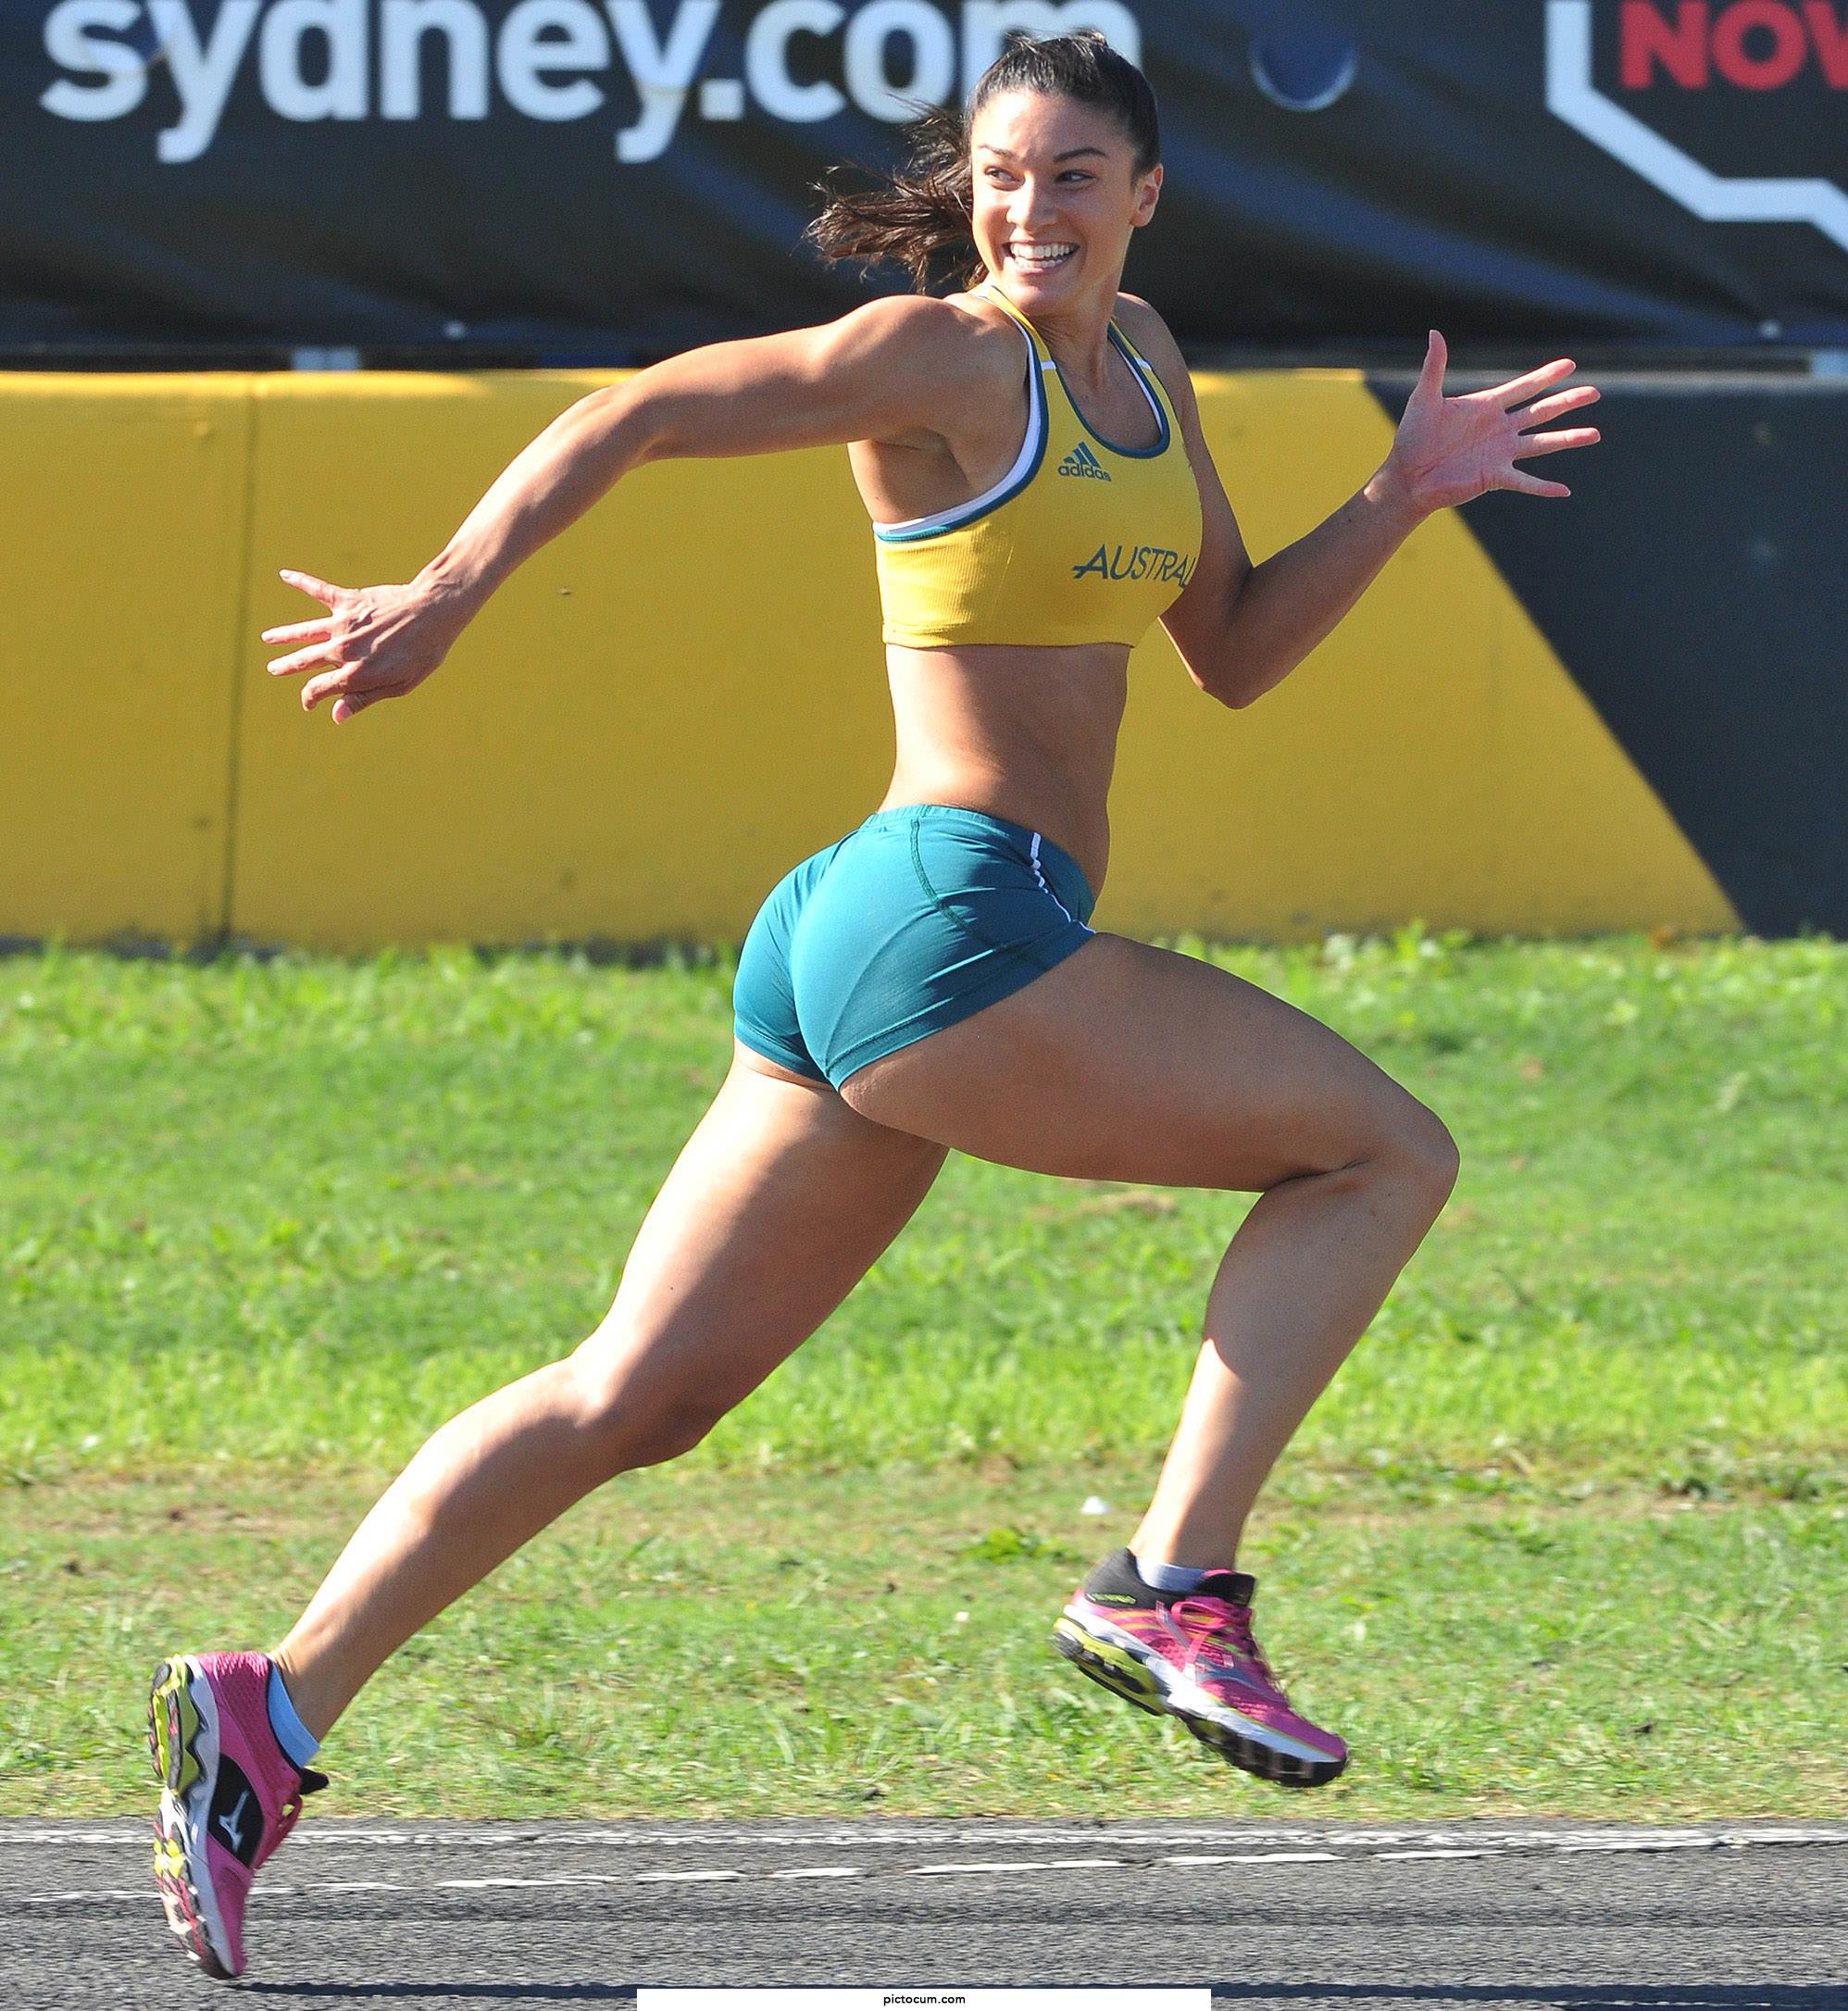 Michelle Jenneke's big fit ass would drain your dick dry